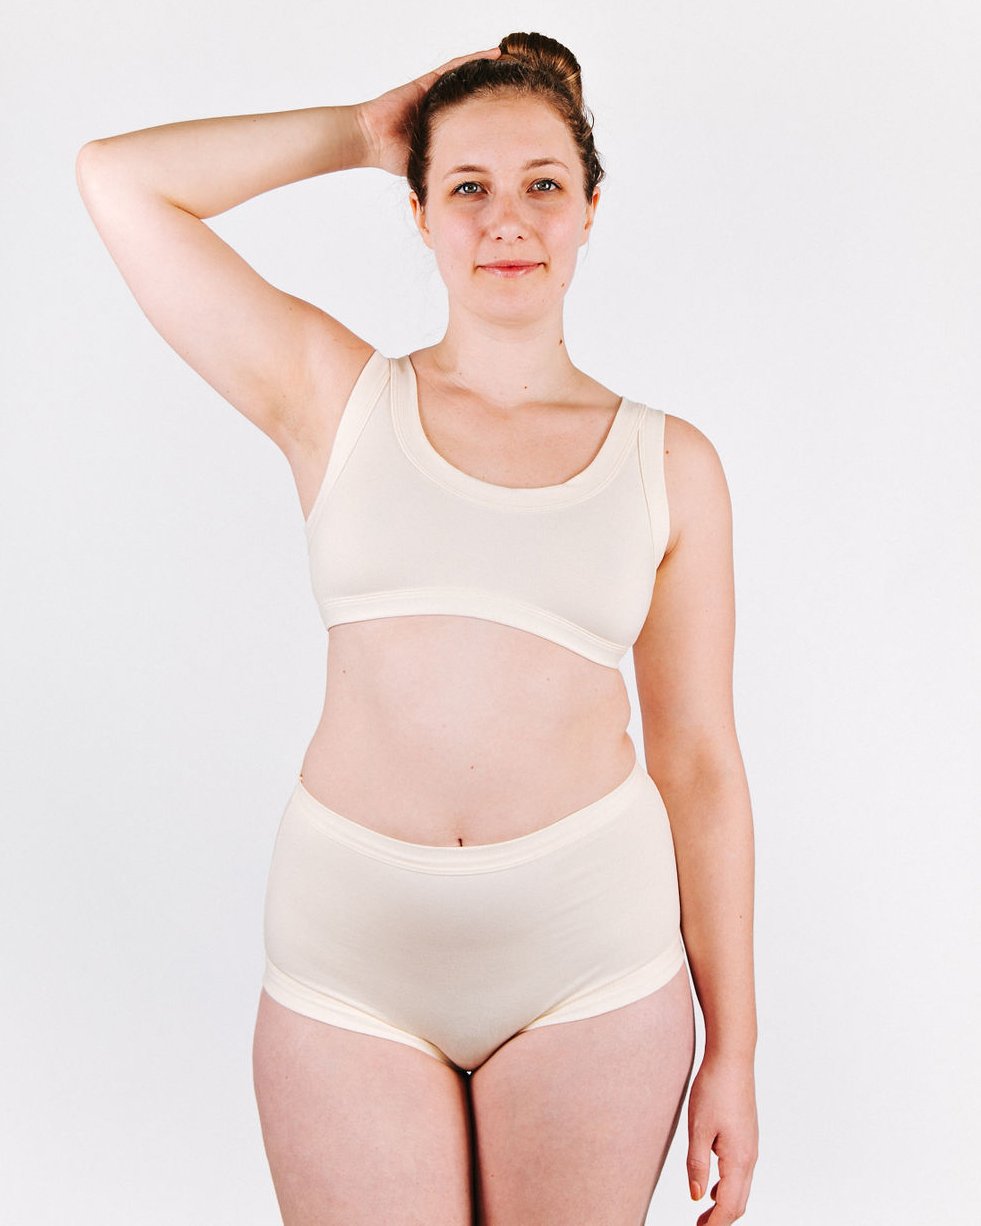 Fit photo from the front of Thunderpants organic cotton Bralette and Women’s Original Style underwear in off-white on a woman.